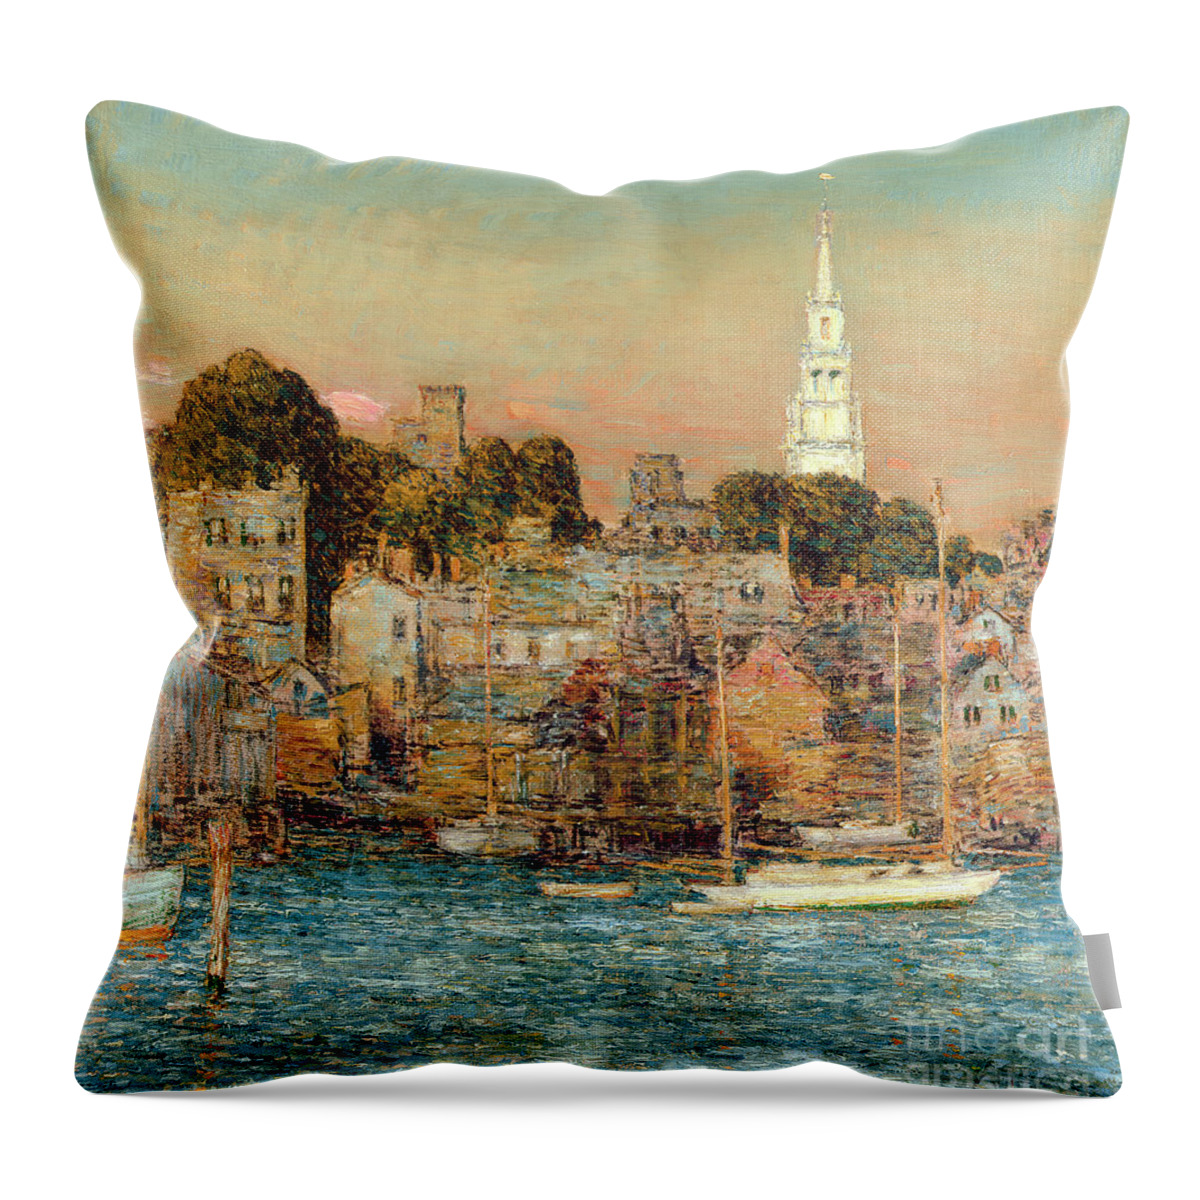 October Sundown Throw Pillow featuring the painting October Sundown by Childe Hassam